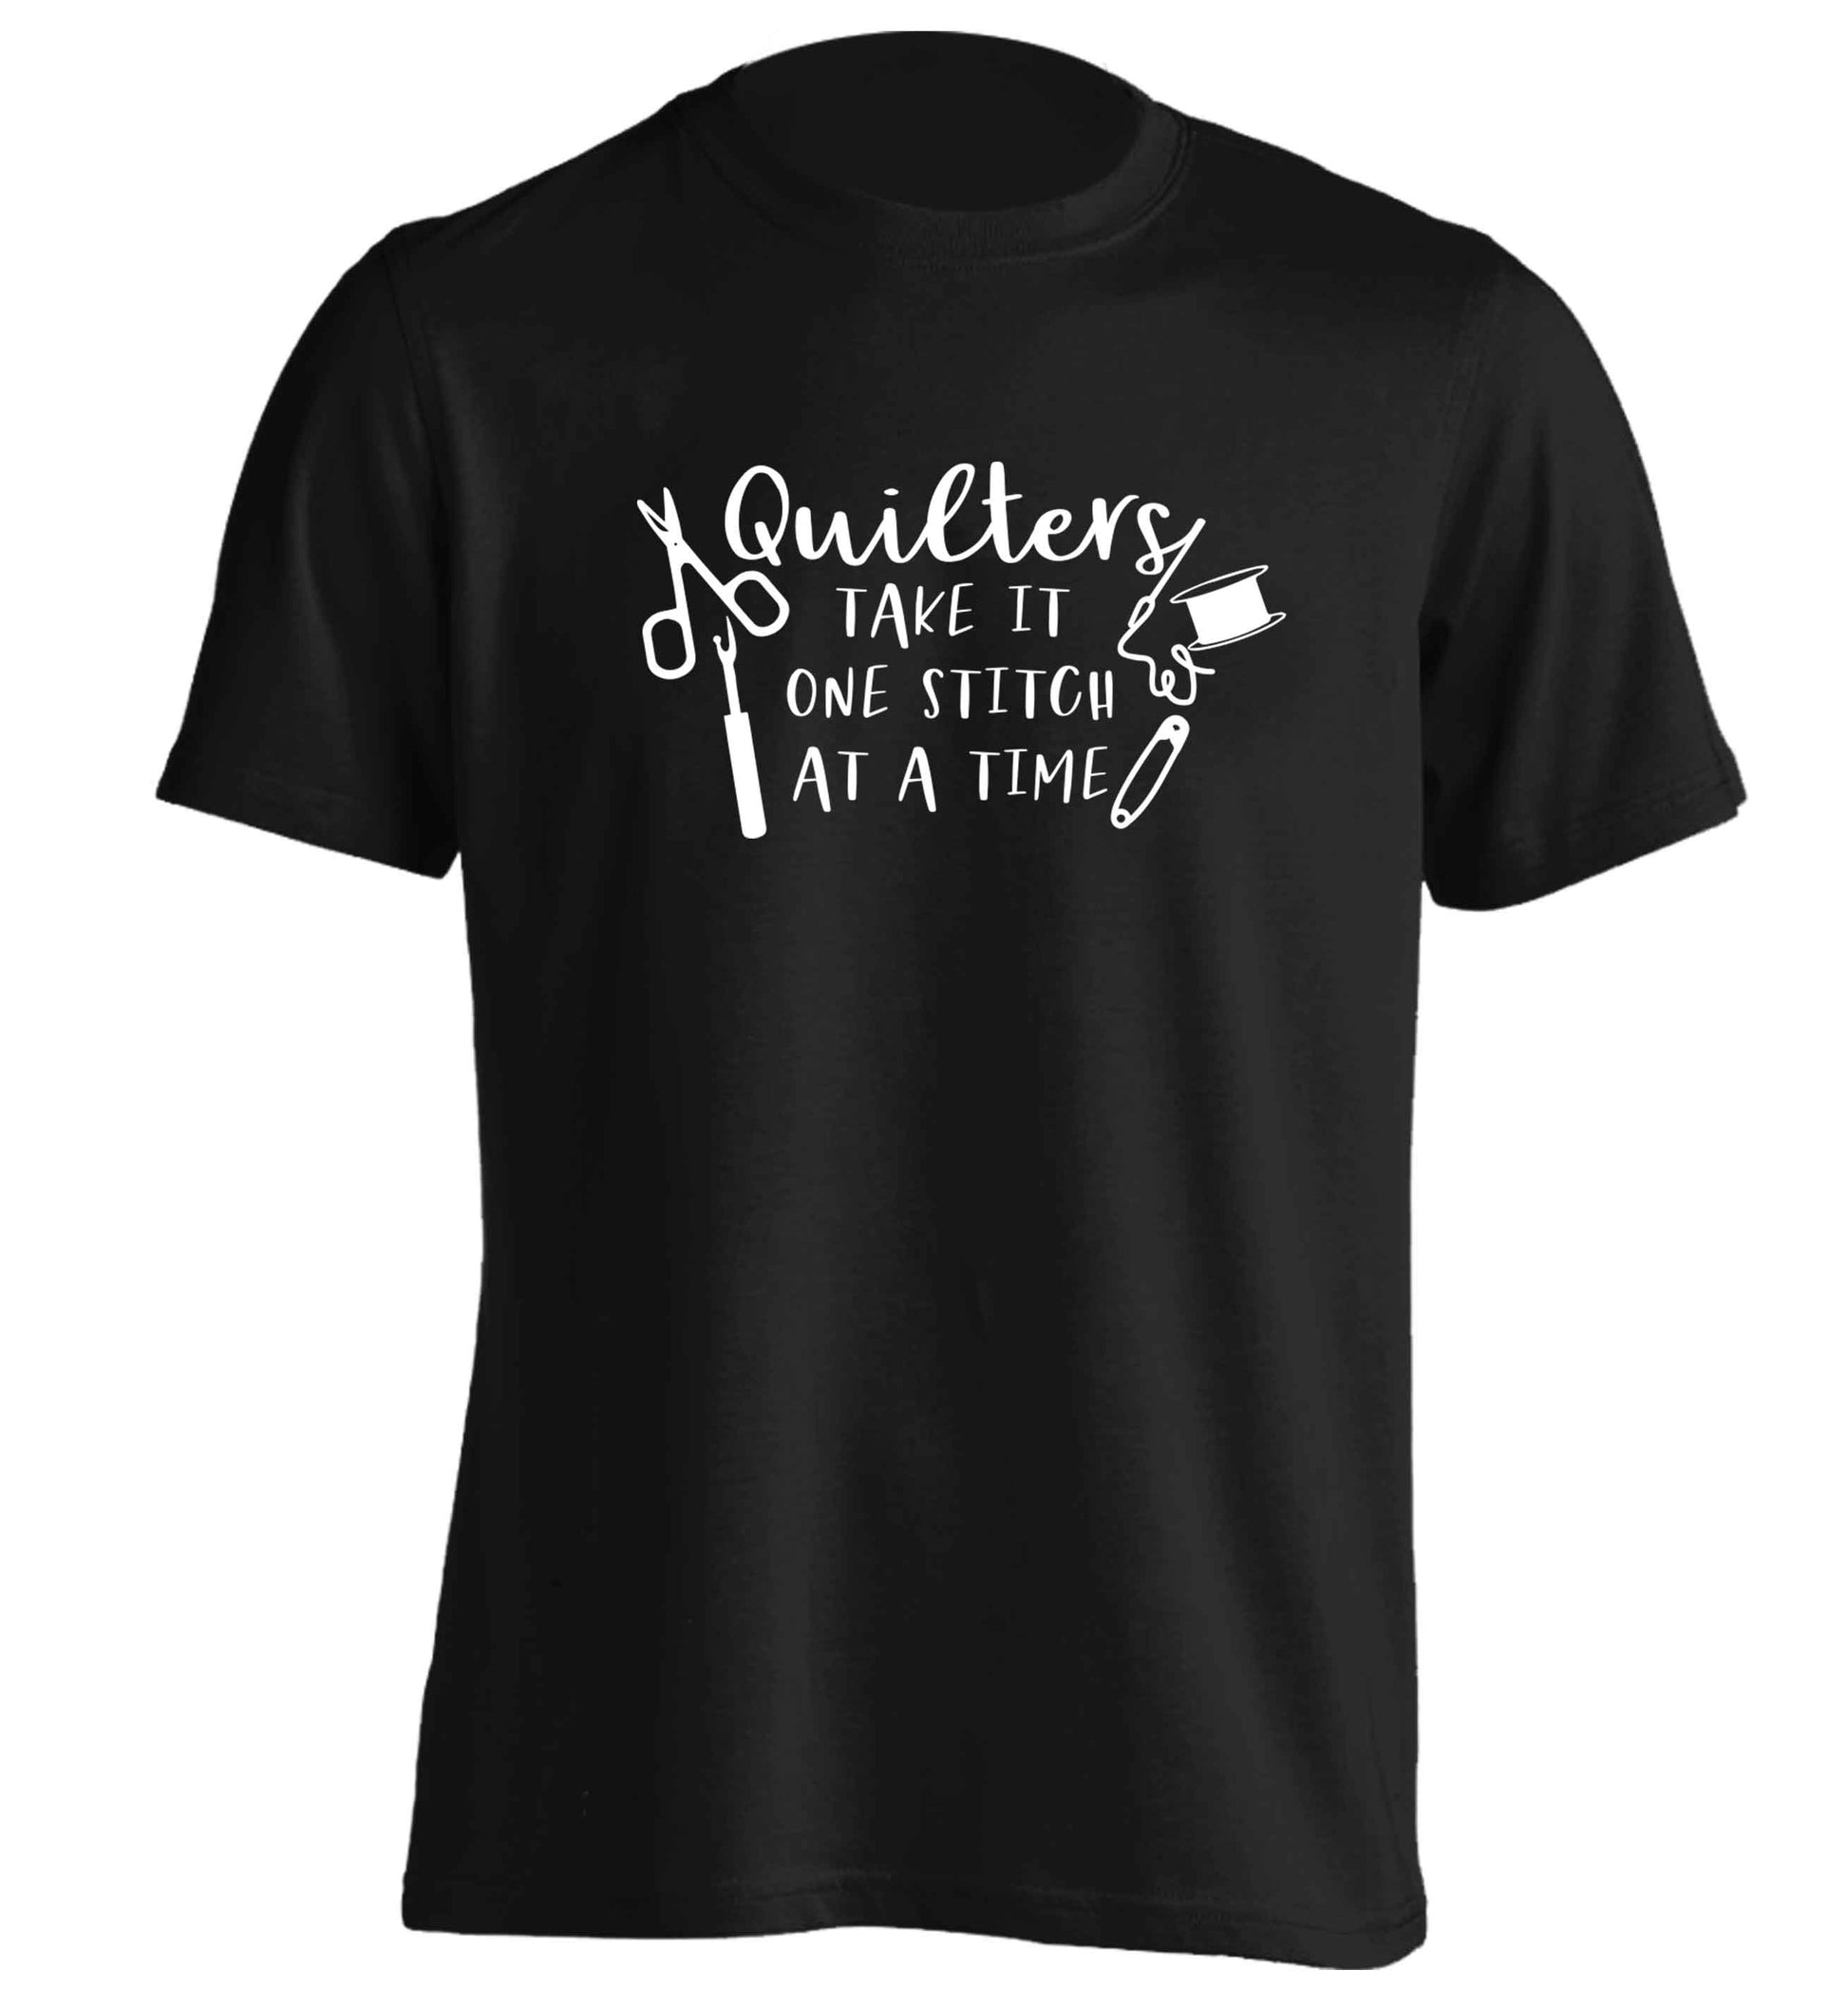 Quilters take it one stitch at a time  adults unisex black Tshirt 2XL